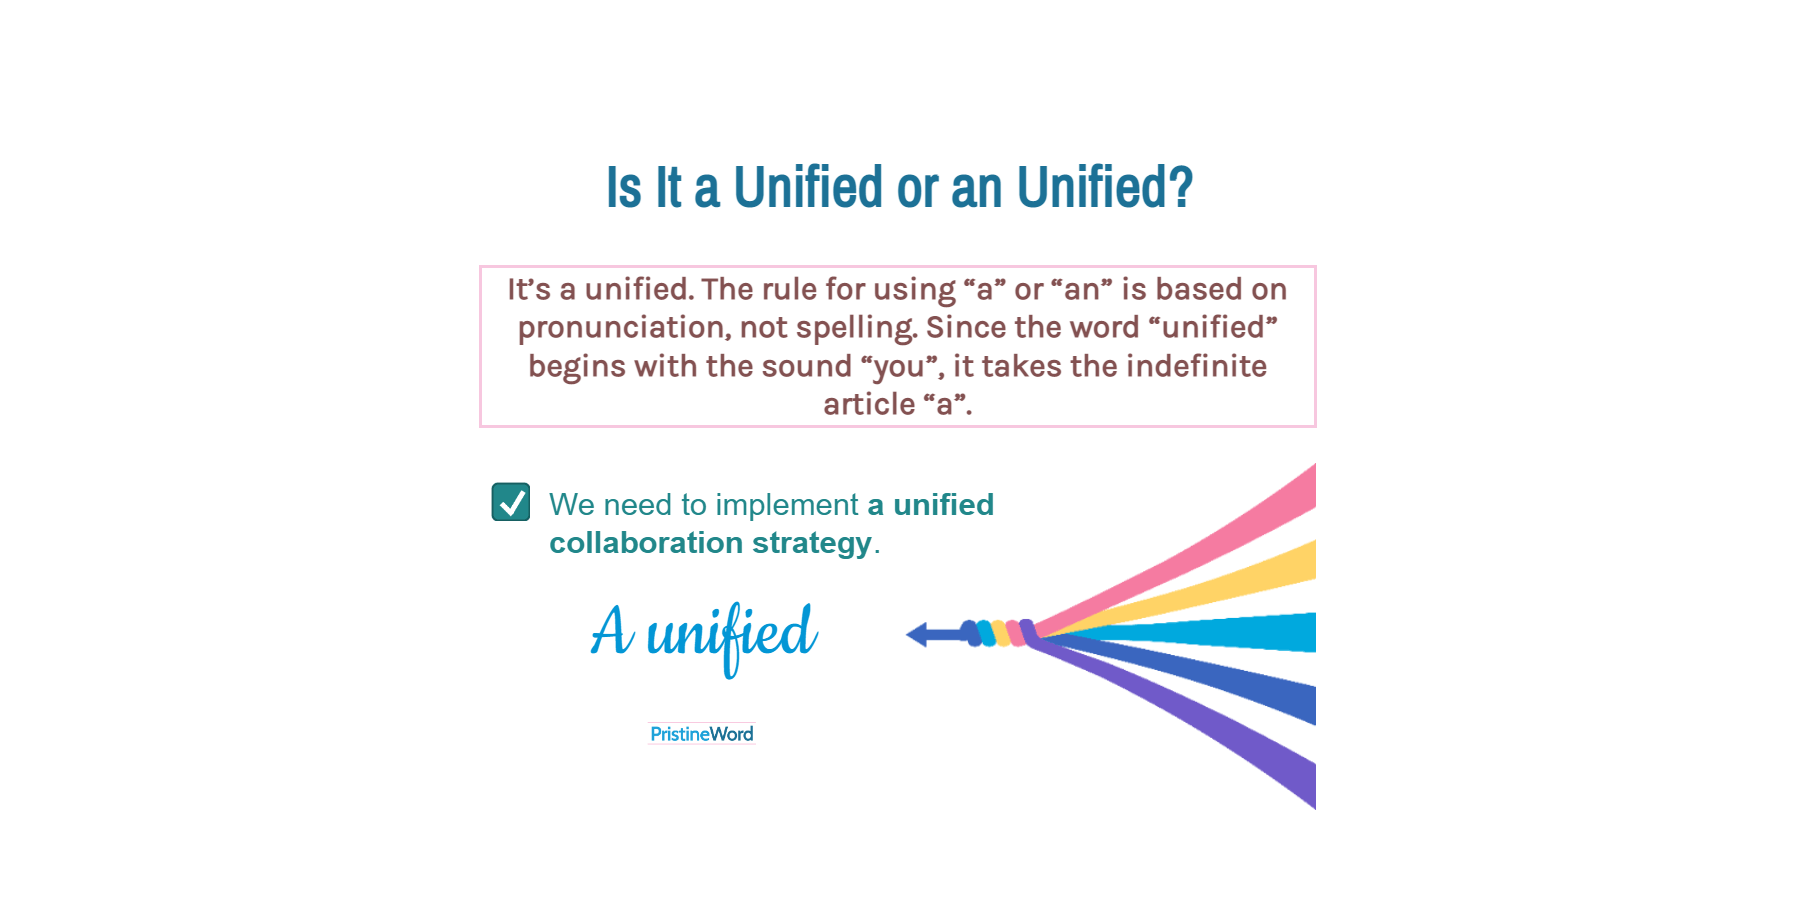 Is It a Unified or an Unified?